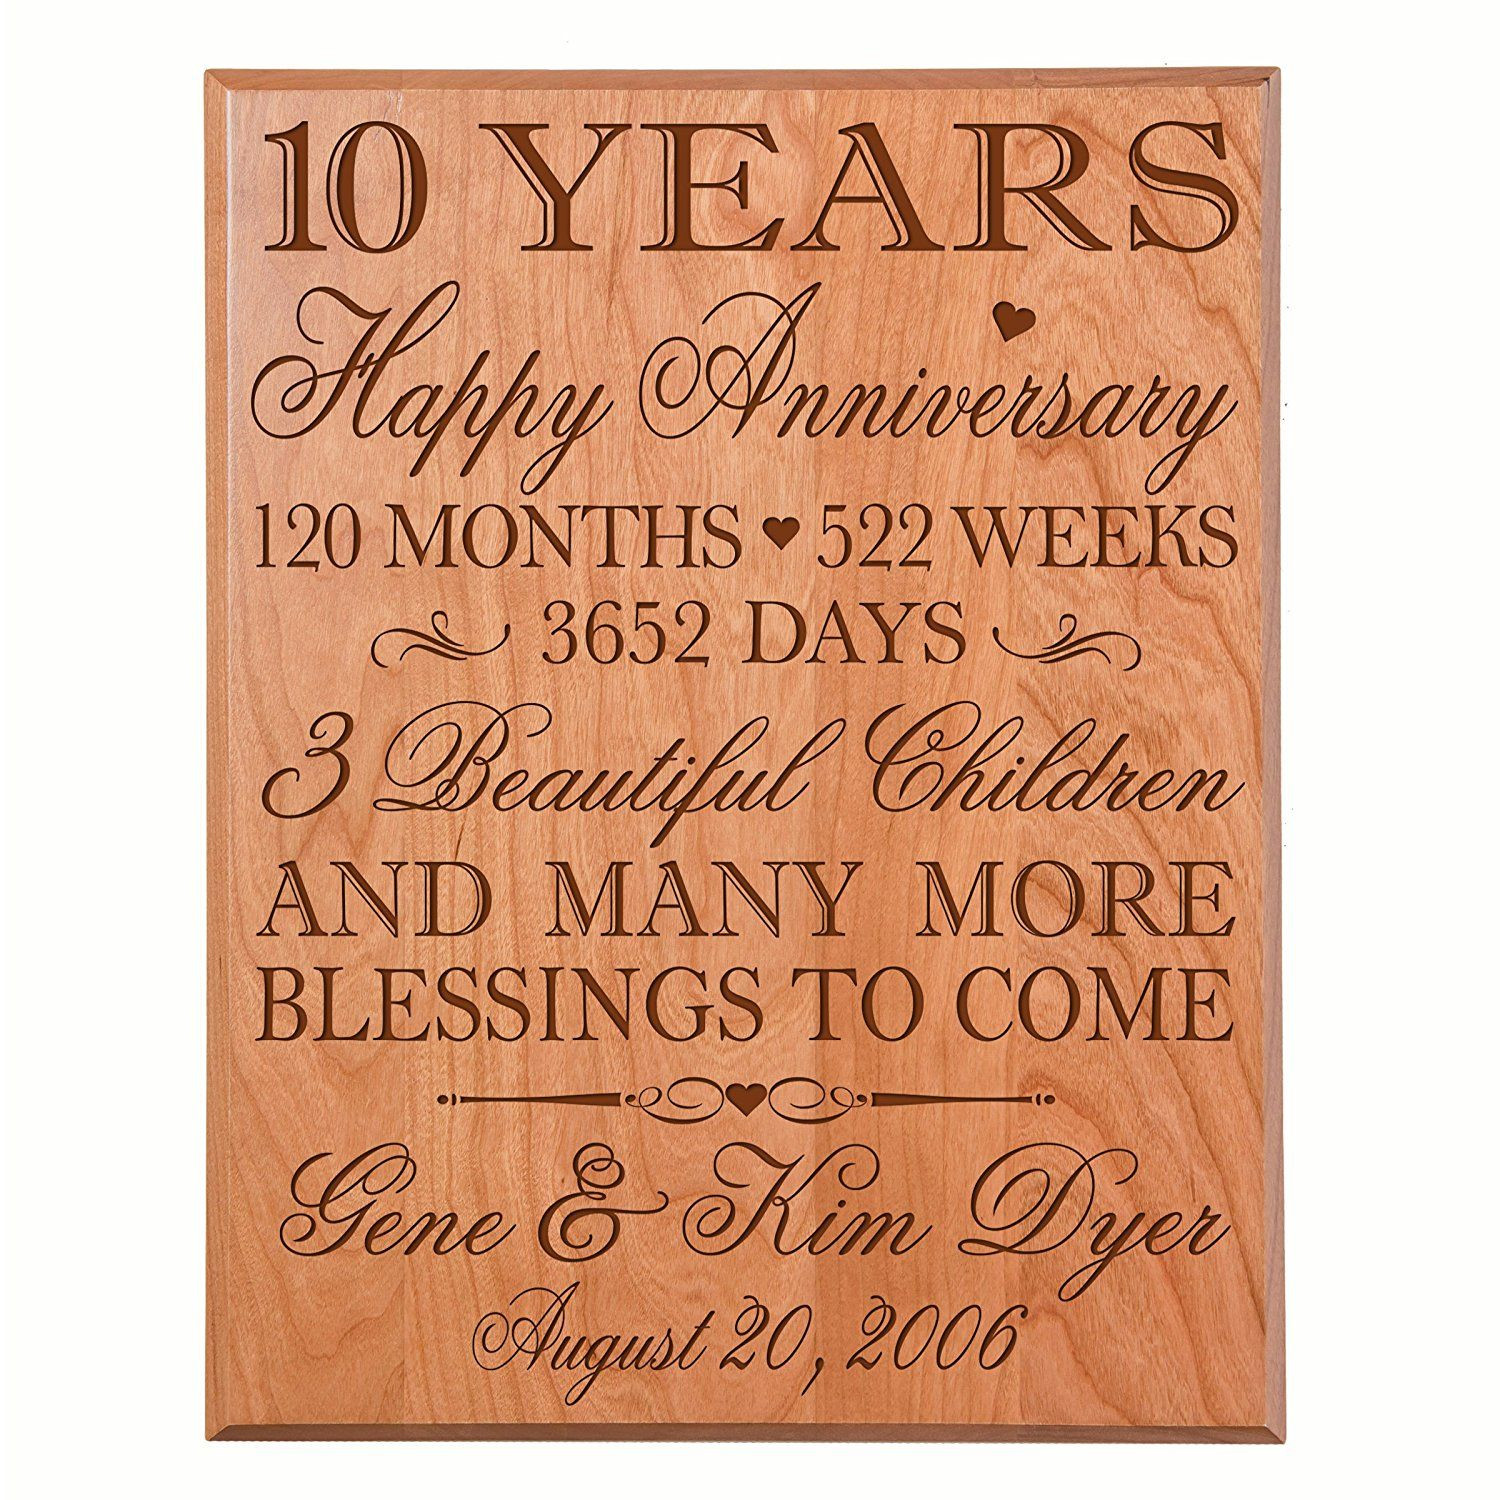 10 Year Anniversary Gift Ideas For Couple
 Personalized 10 year wedding Anniversary Gifts for Couple